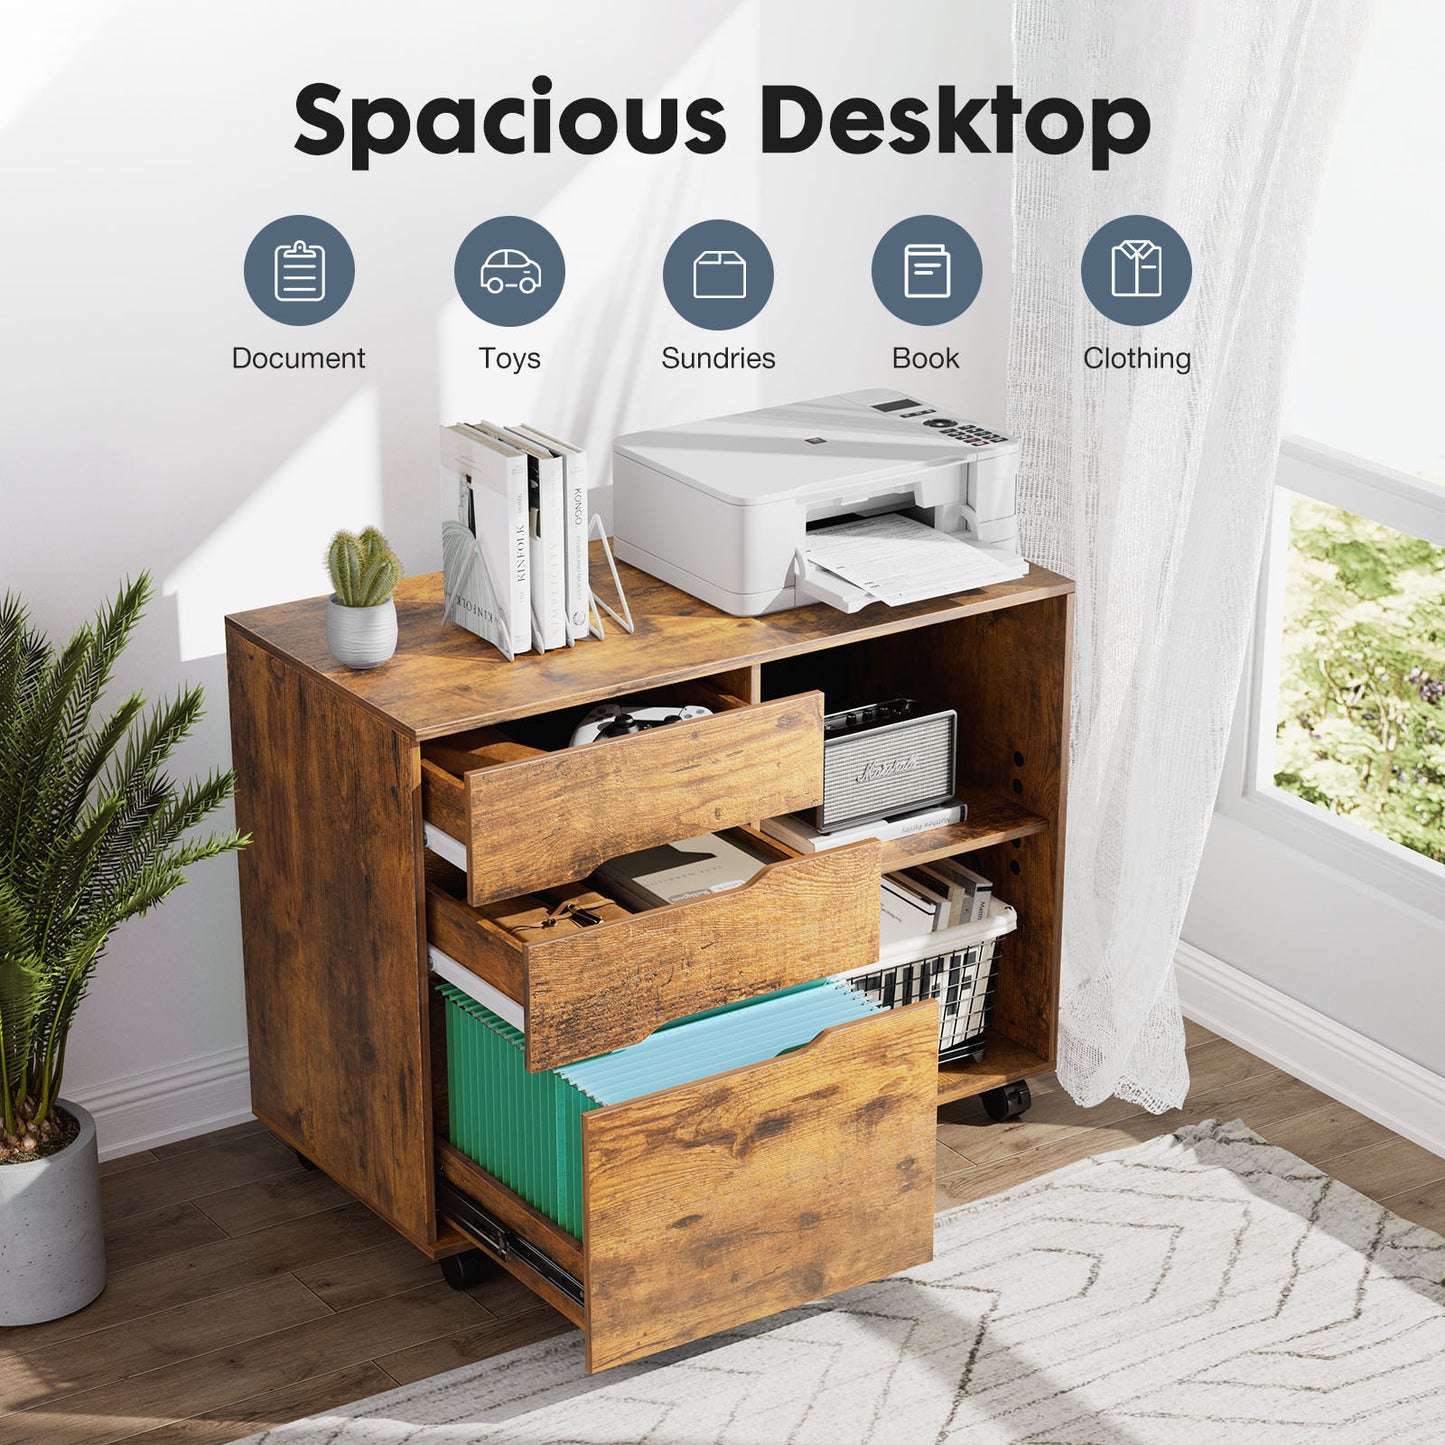 Sweetcrispy 5-Drawer Filing Cabinet with Open Storage Shelves